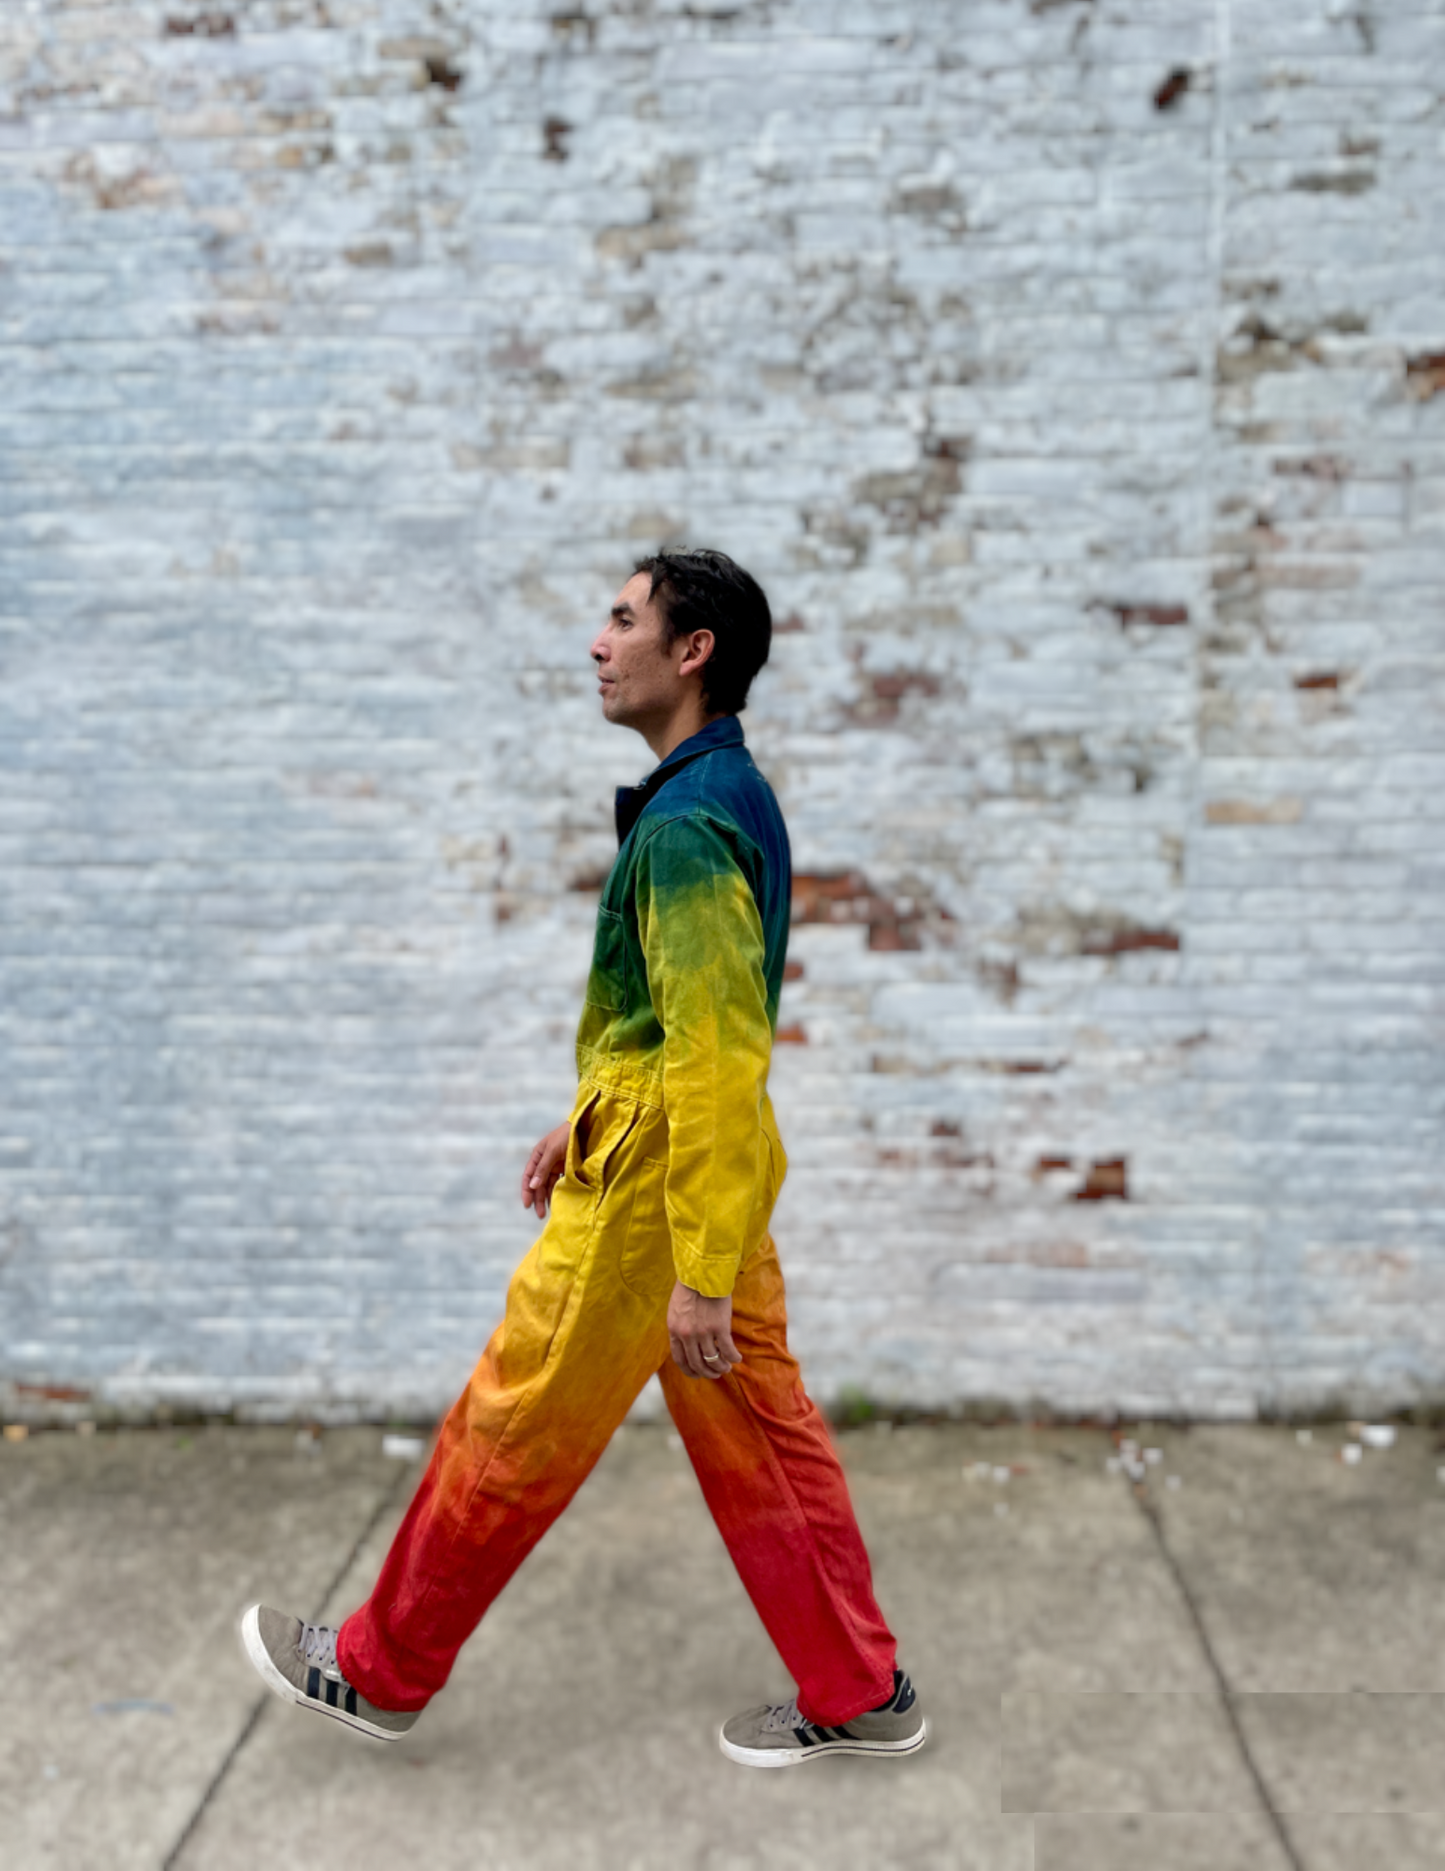 Naturally Dyed Rainbow Coveralls